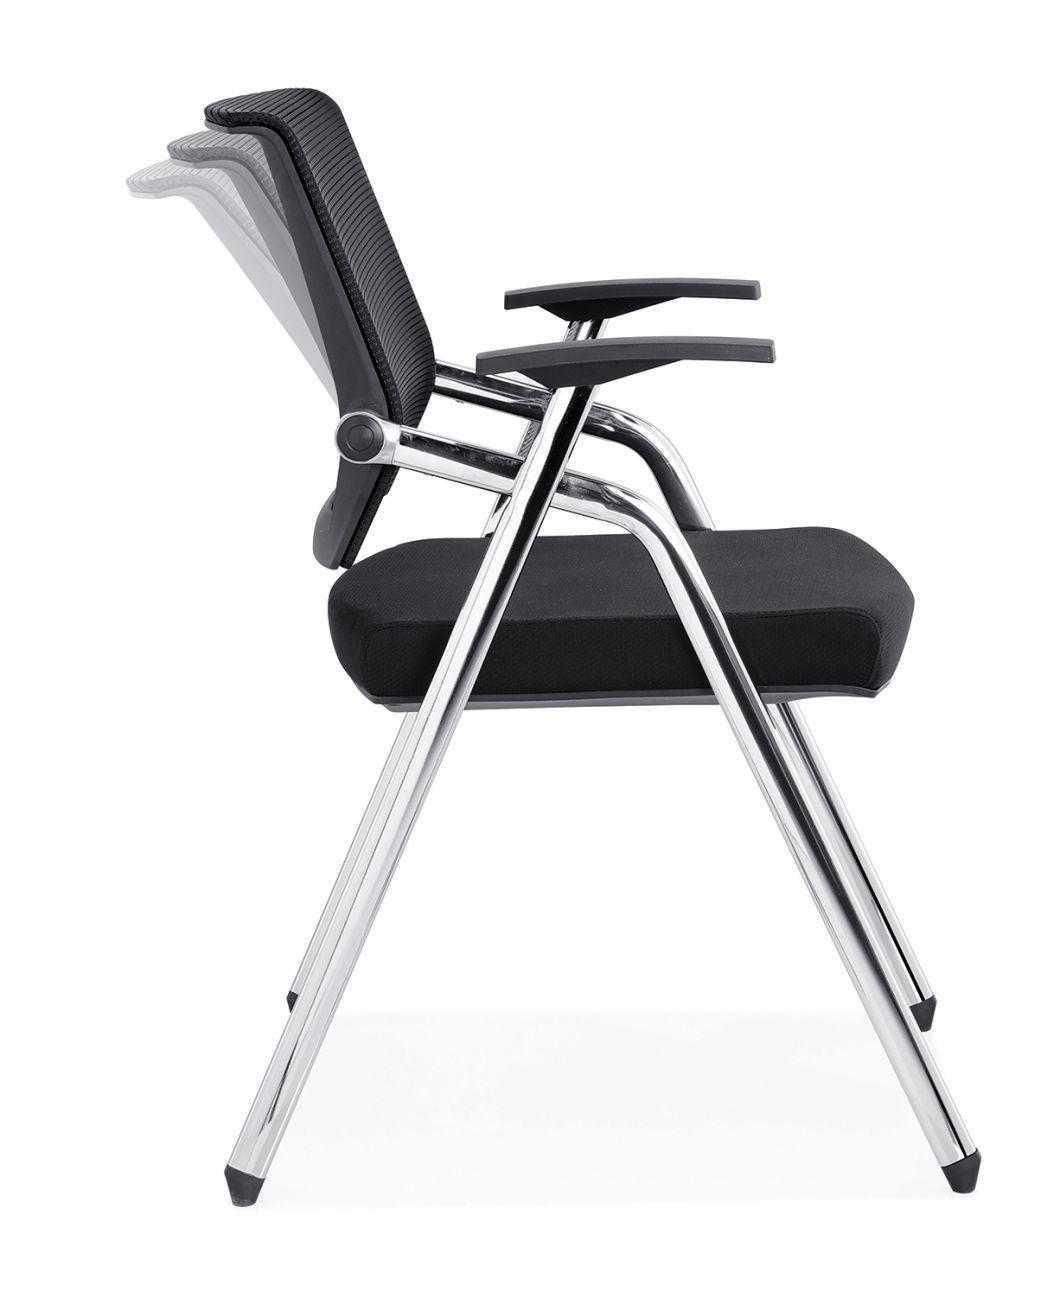 D191 Morden Foldable Office Chair with Writing Tablet